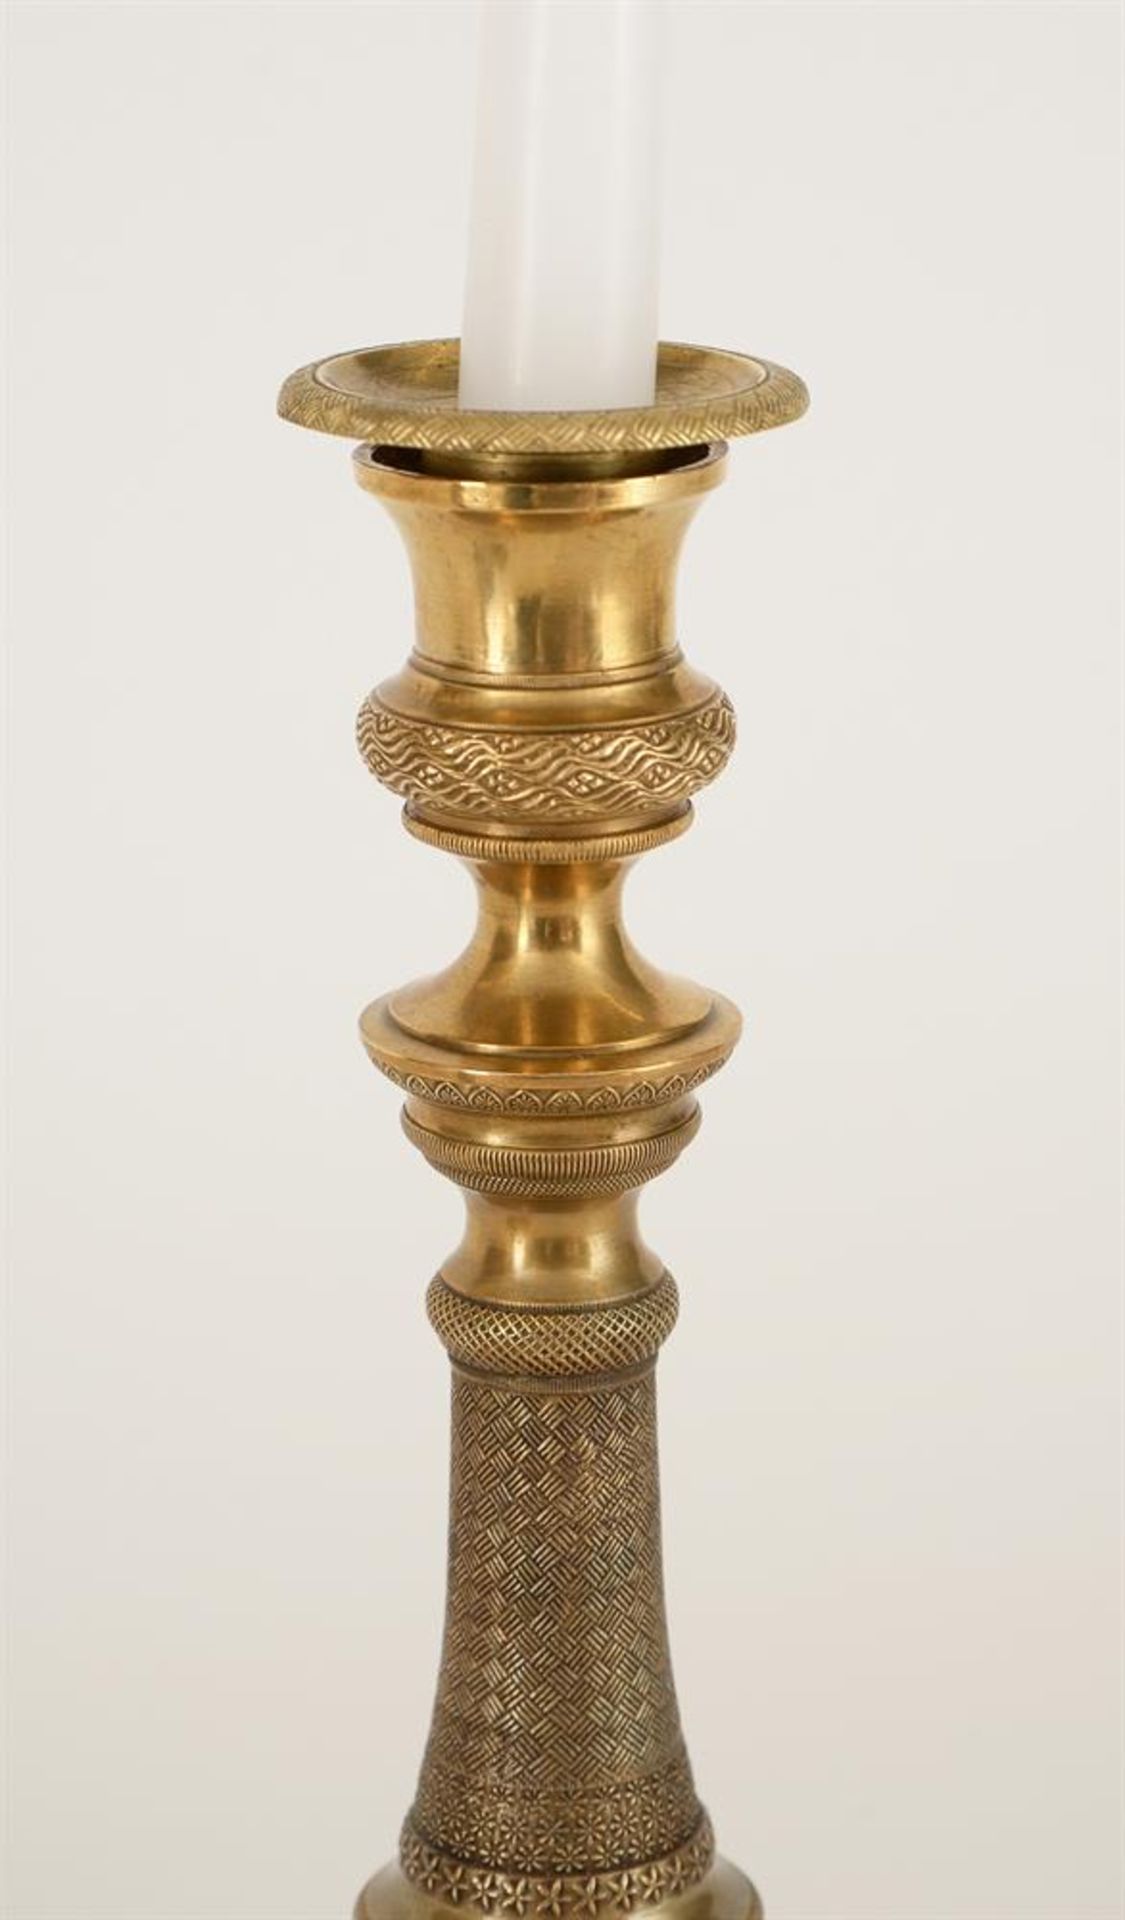 A PAIR OF FRENCH BRASS CANDLESTICKS, IN THE EMPIRE MANNER, LATE 19TH CENTURY - Image 4 of 5